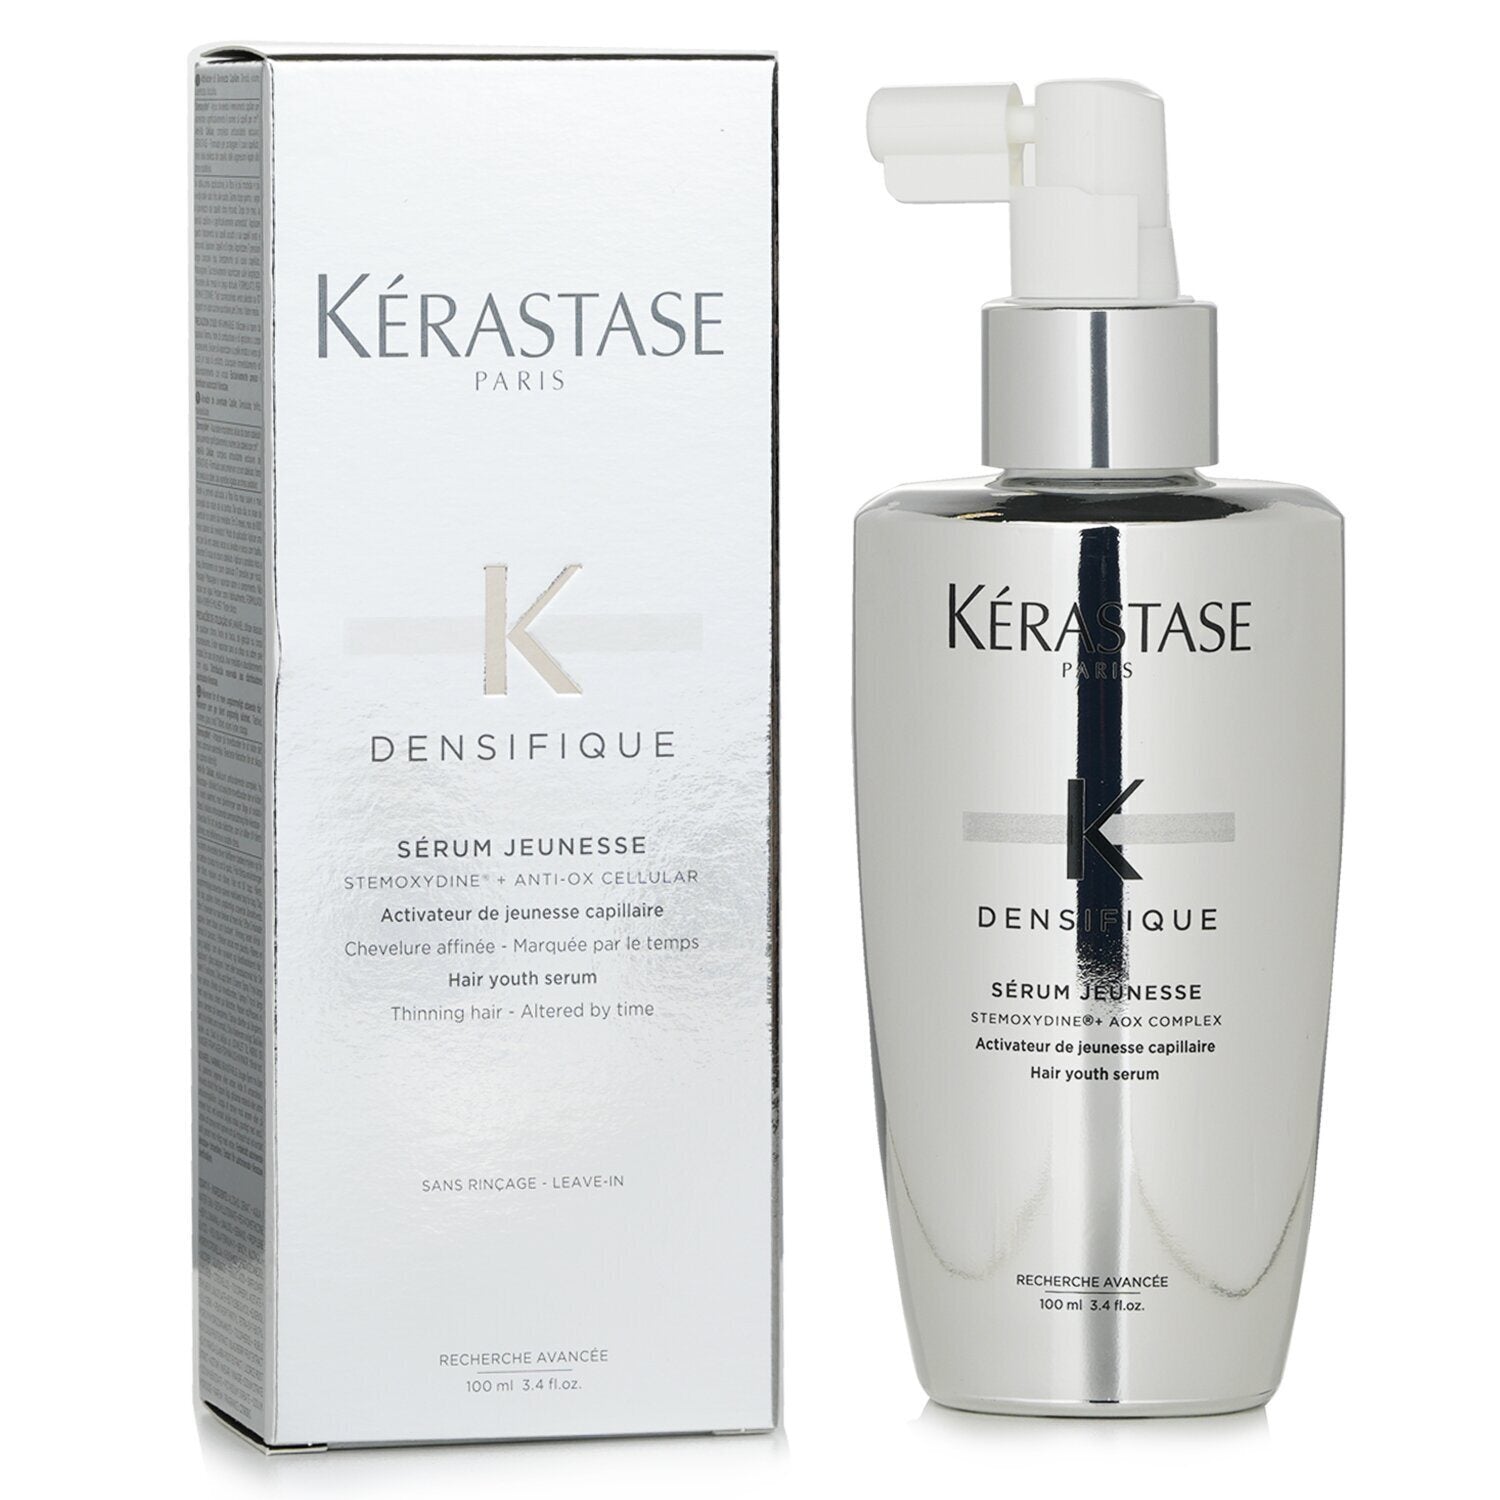 KERASTASE - Densifique Serum Jeunesse Hair Youth Serum (Thinning Hair - Altered By Time) - 100ml/3.4oz 3P's Inclusive Beauty